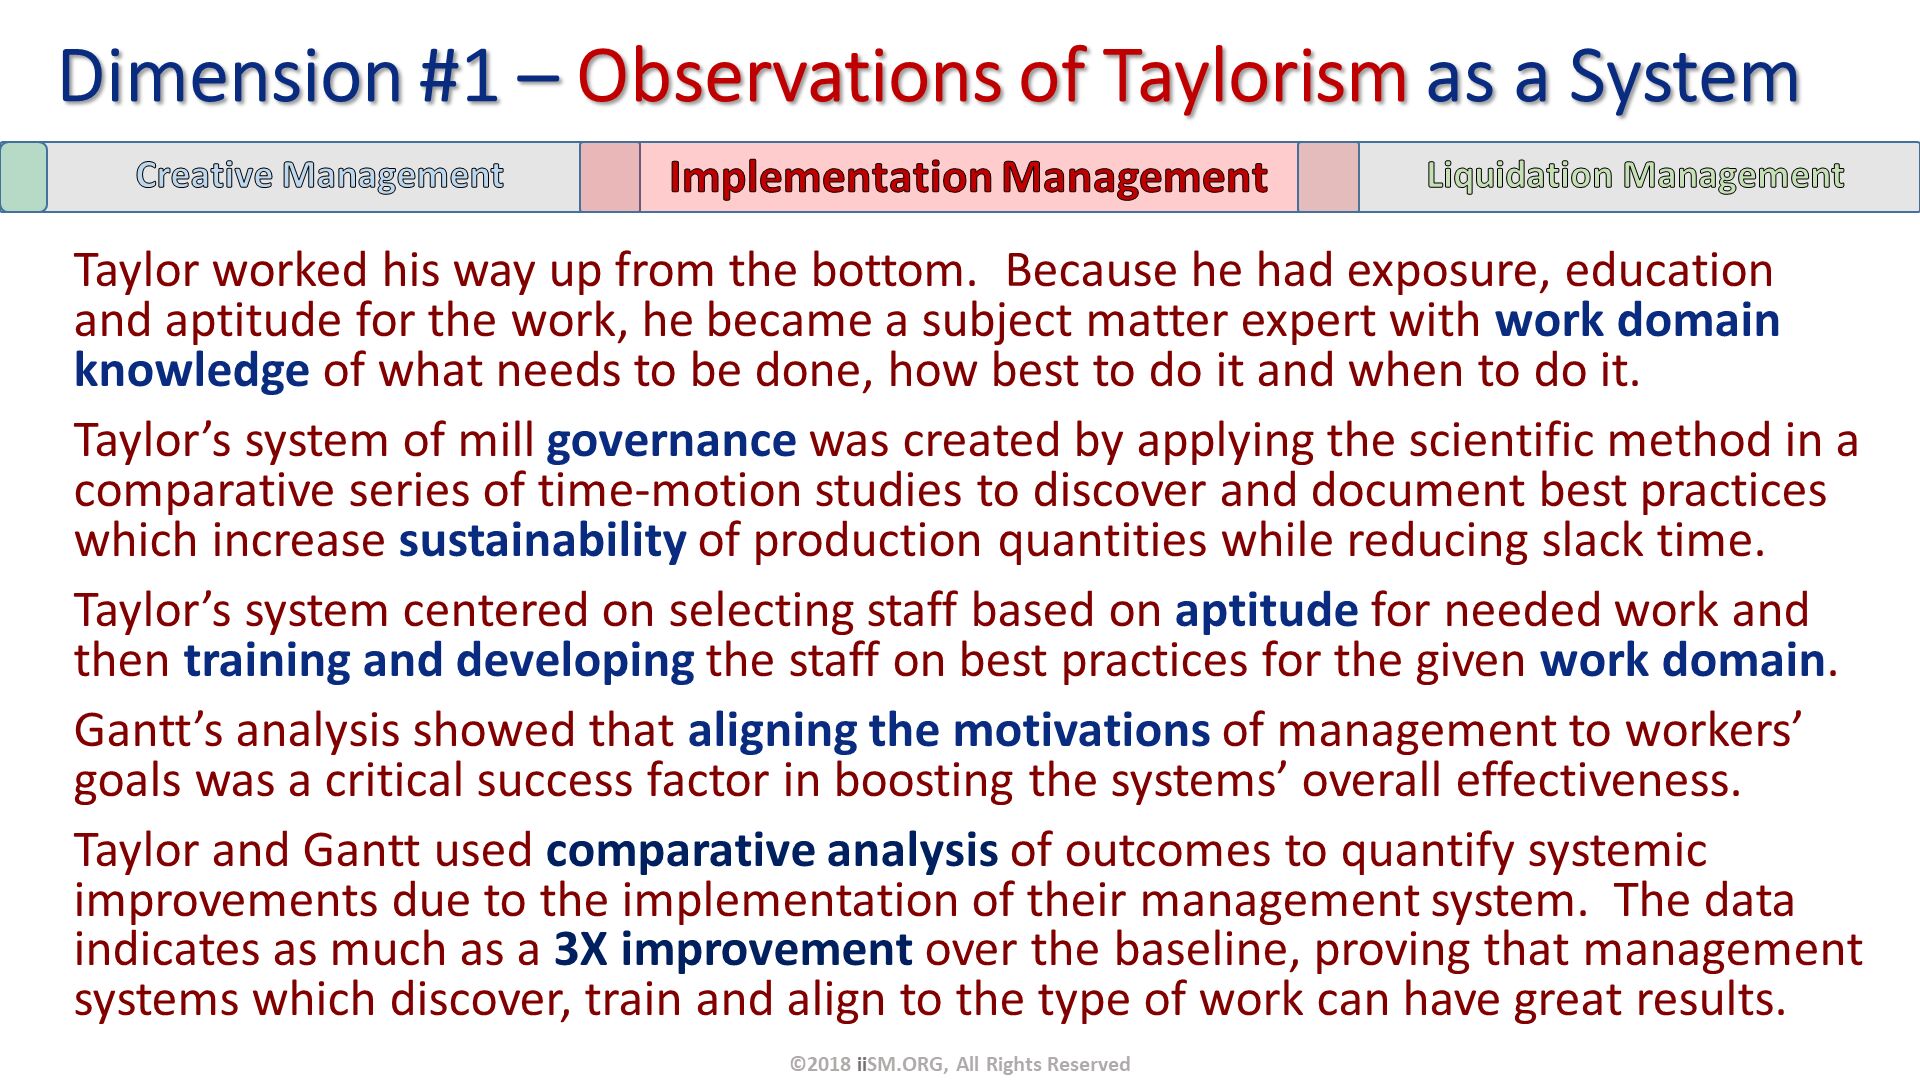 Taylor worked his way up from the bottom.  Because he had exposure, education and aptitude for the work, he became a subject matter expert with work domain knowledge of what needs to be done, how best to do it and when to do it.
Taylor’s system of mill governance was created by applying the scientific method in a comparative series of time-motion studies to discover and document best practices which increase sustainability of production quantities while reducing slack time. 
Taylor’s system centered on selecting staff based on aptitude for needed work and then training and developing the staff on best practices for the given work domain.
Gantt’s analysis showed that aligning the motivations of management to workers’ goals was a critical success factor in boosting the systems’ overall effectiveness. 
Taylor and Gantt used comparative analysis of outcomes to quantify systemic improvements due to the implementation of their management system.  The data indicates as much as a 3X improvement over the baseline, proving that management systems which discover, train and align to the type of work can have great results.
. Dimension #1 – Observations of Taylorism as a System. ©2018 iiSM.ORG, All Rights Reserved. 